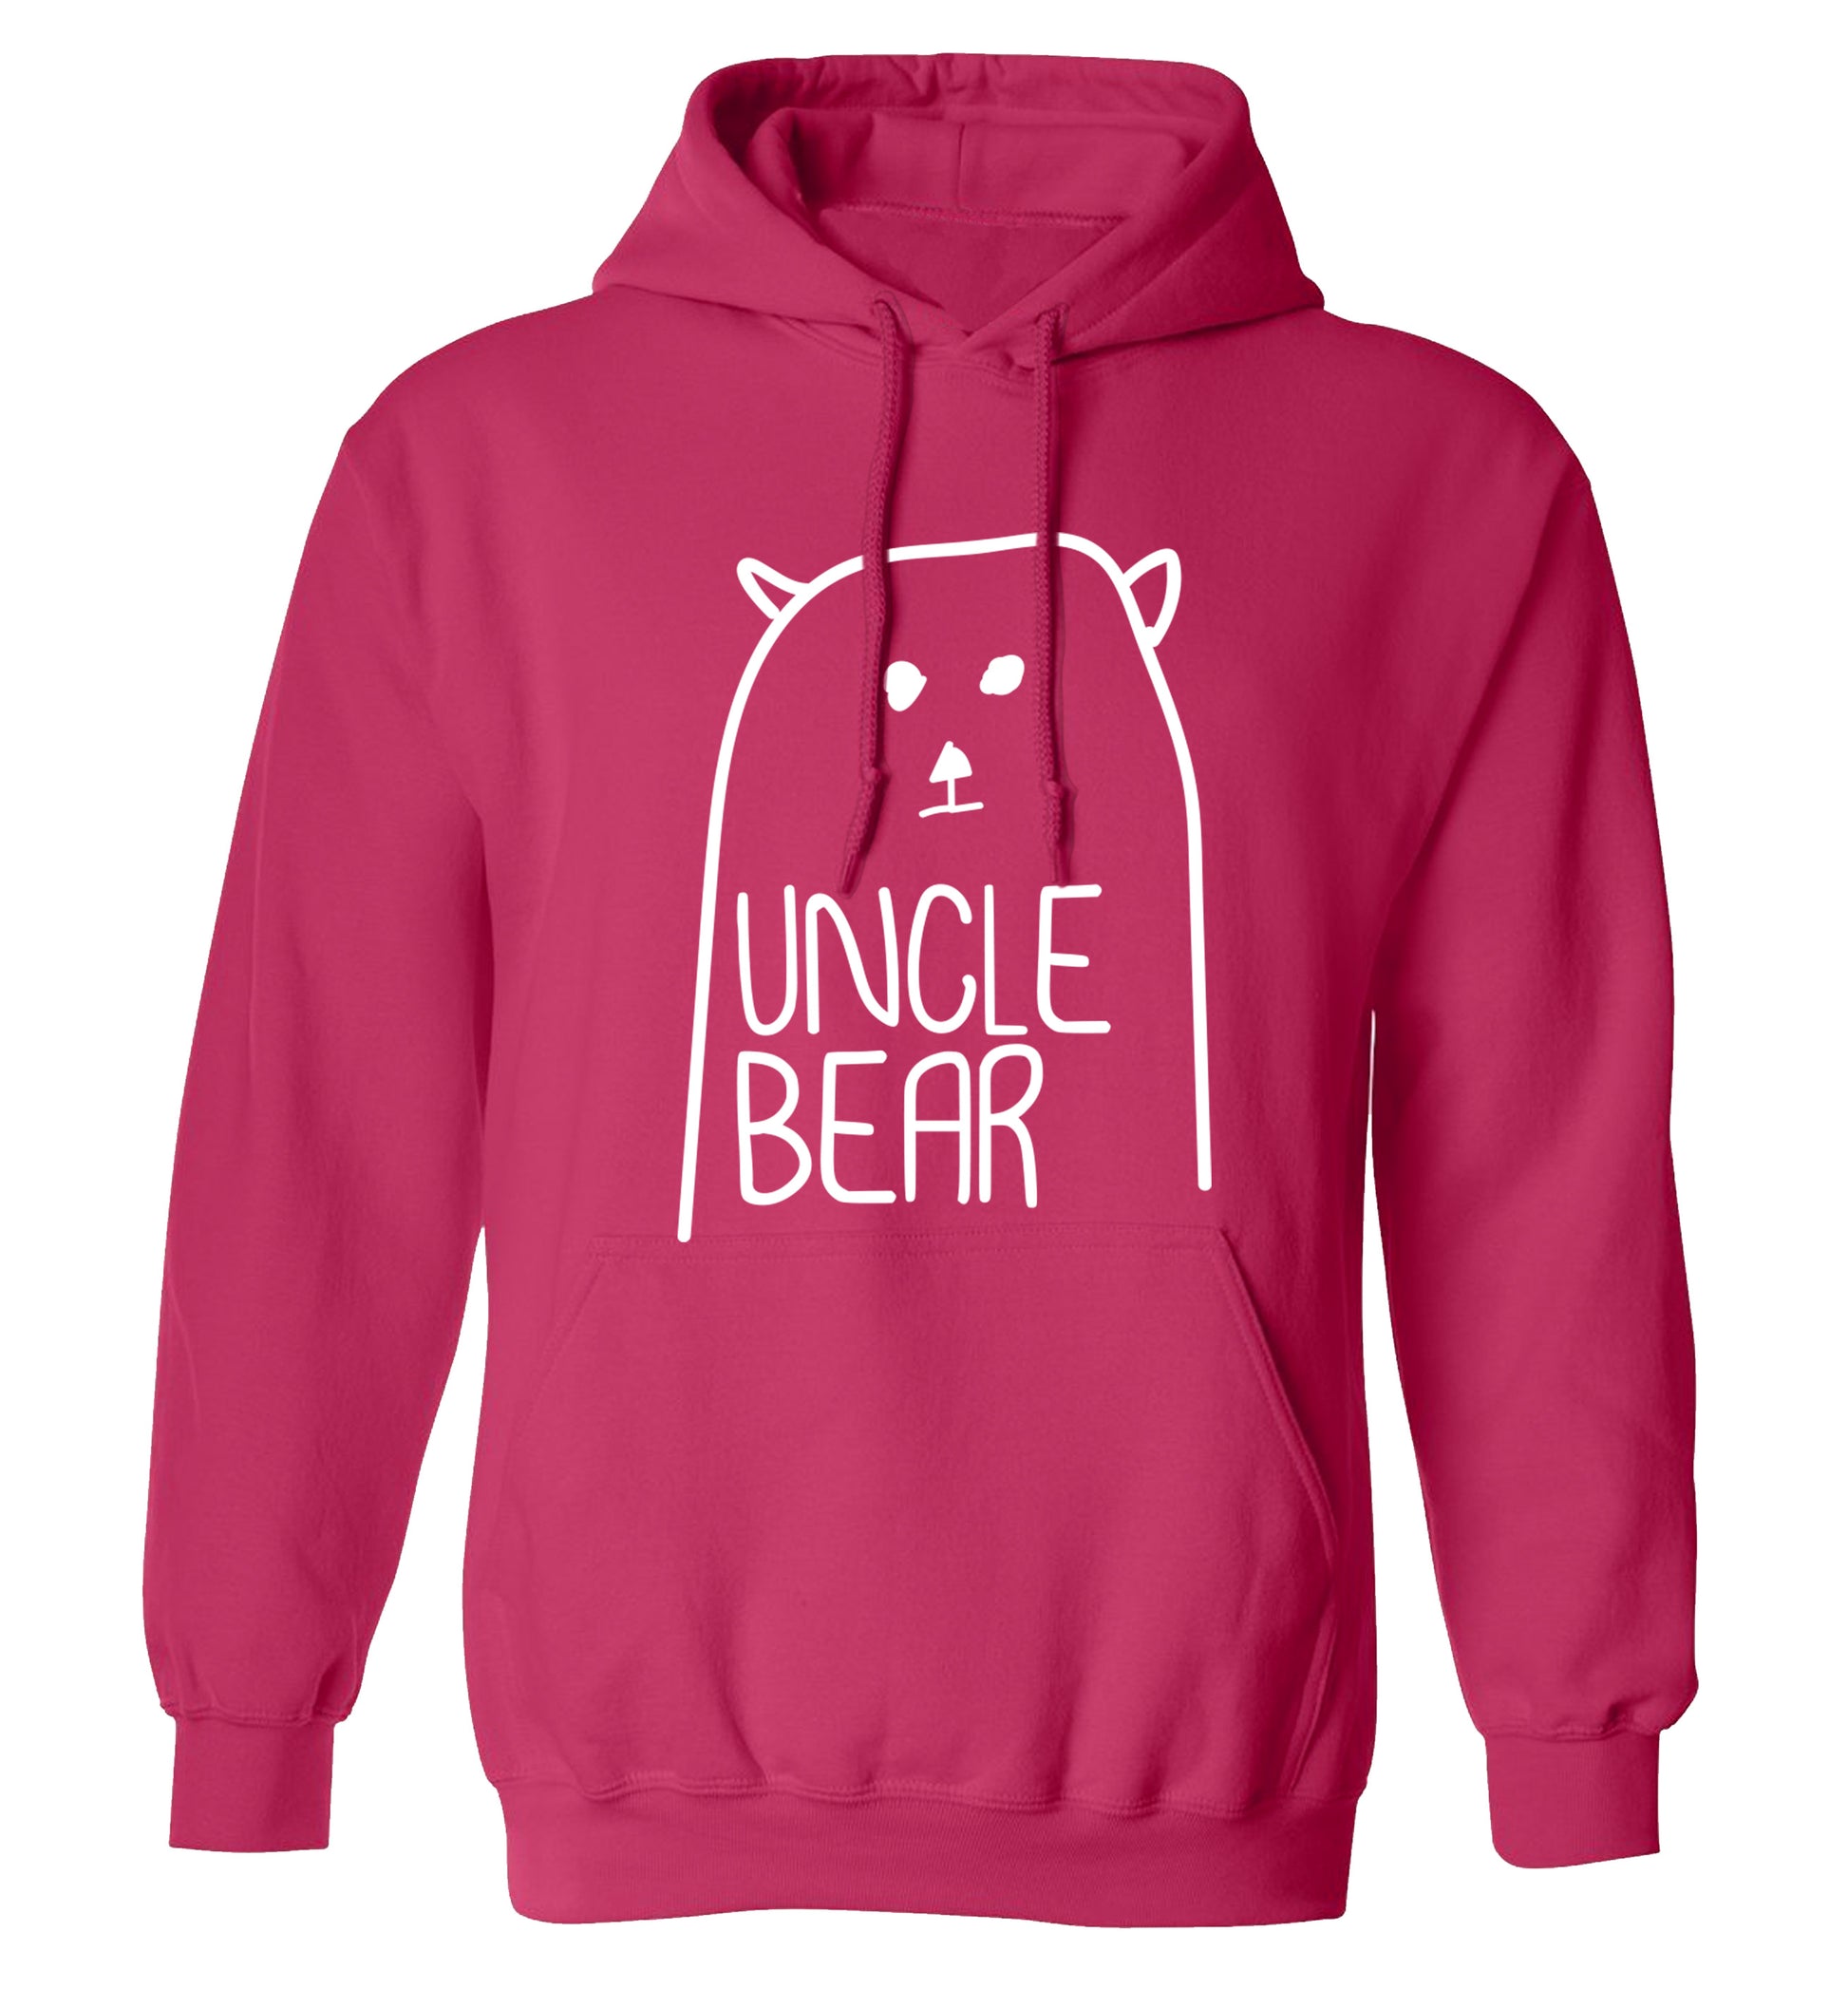 Uncle bear adults unisex pink hoodie 2XL